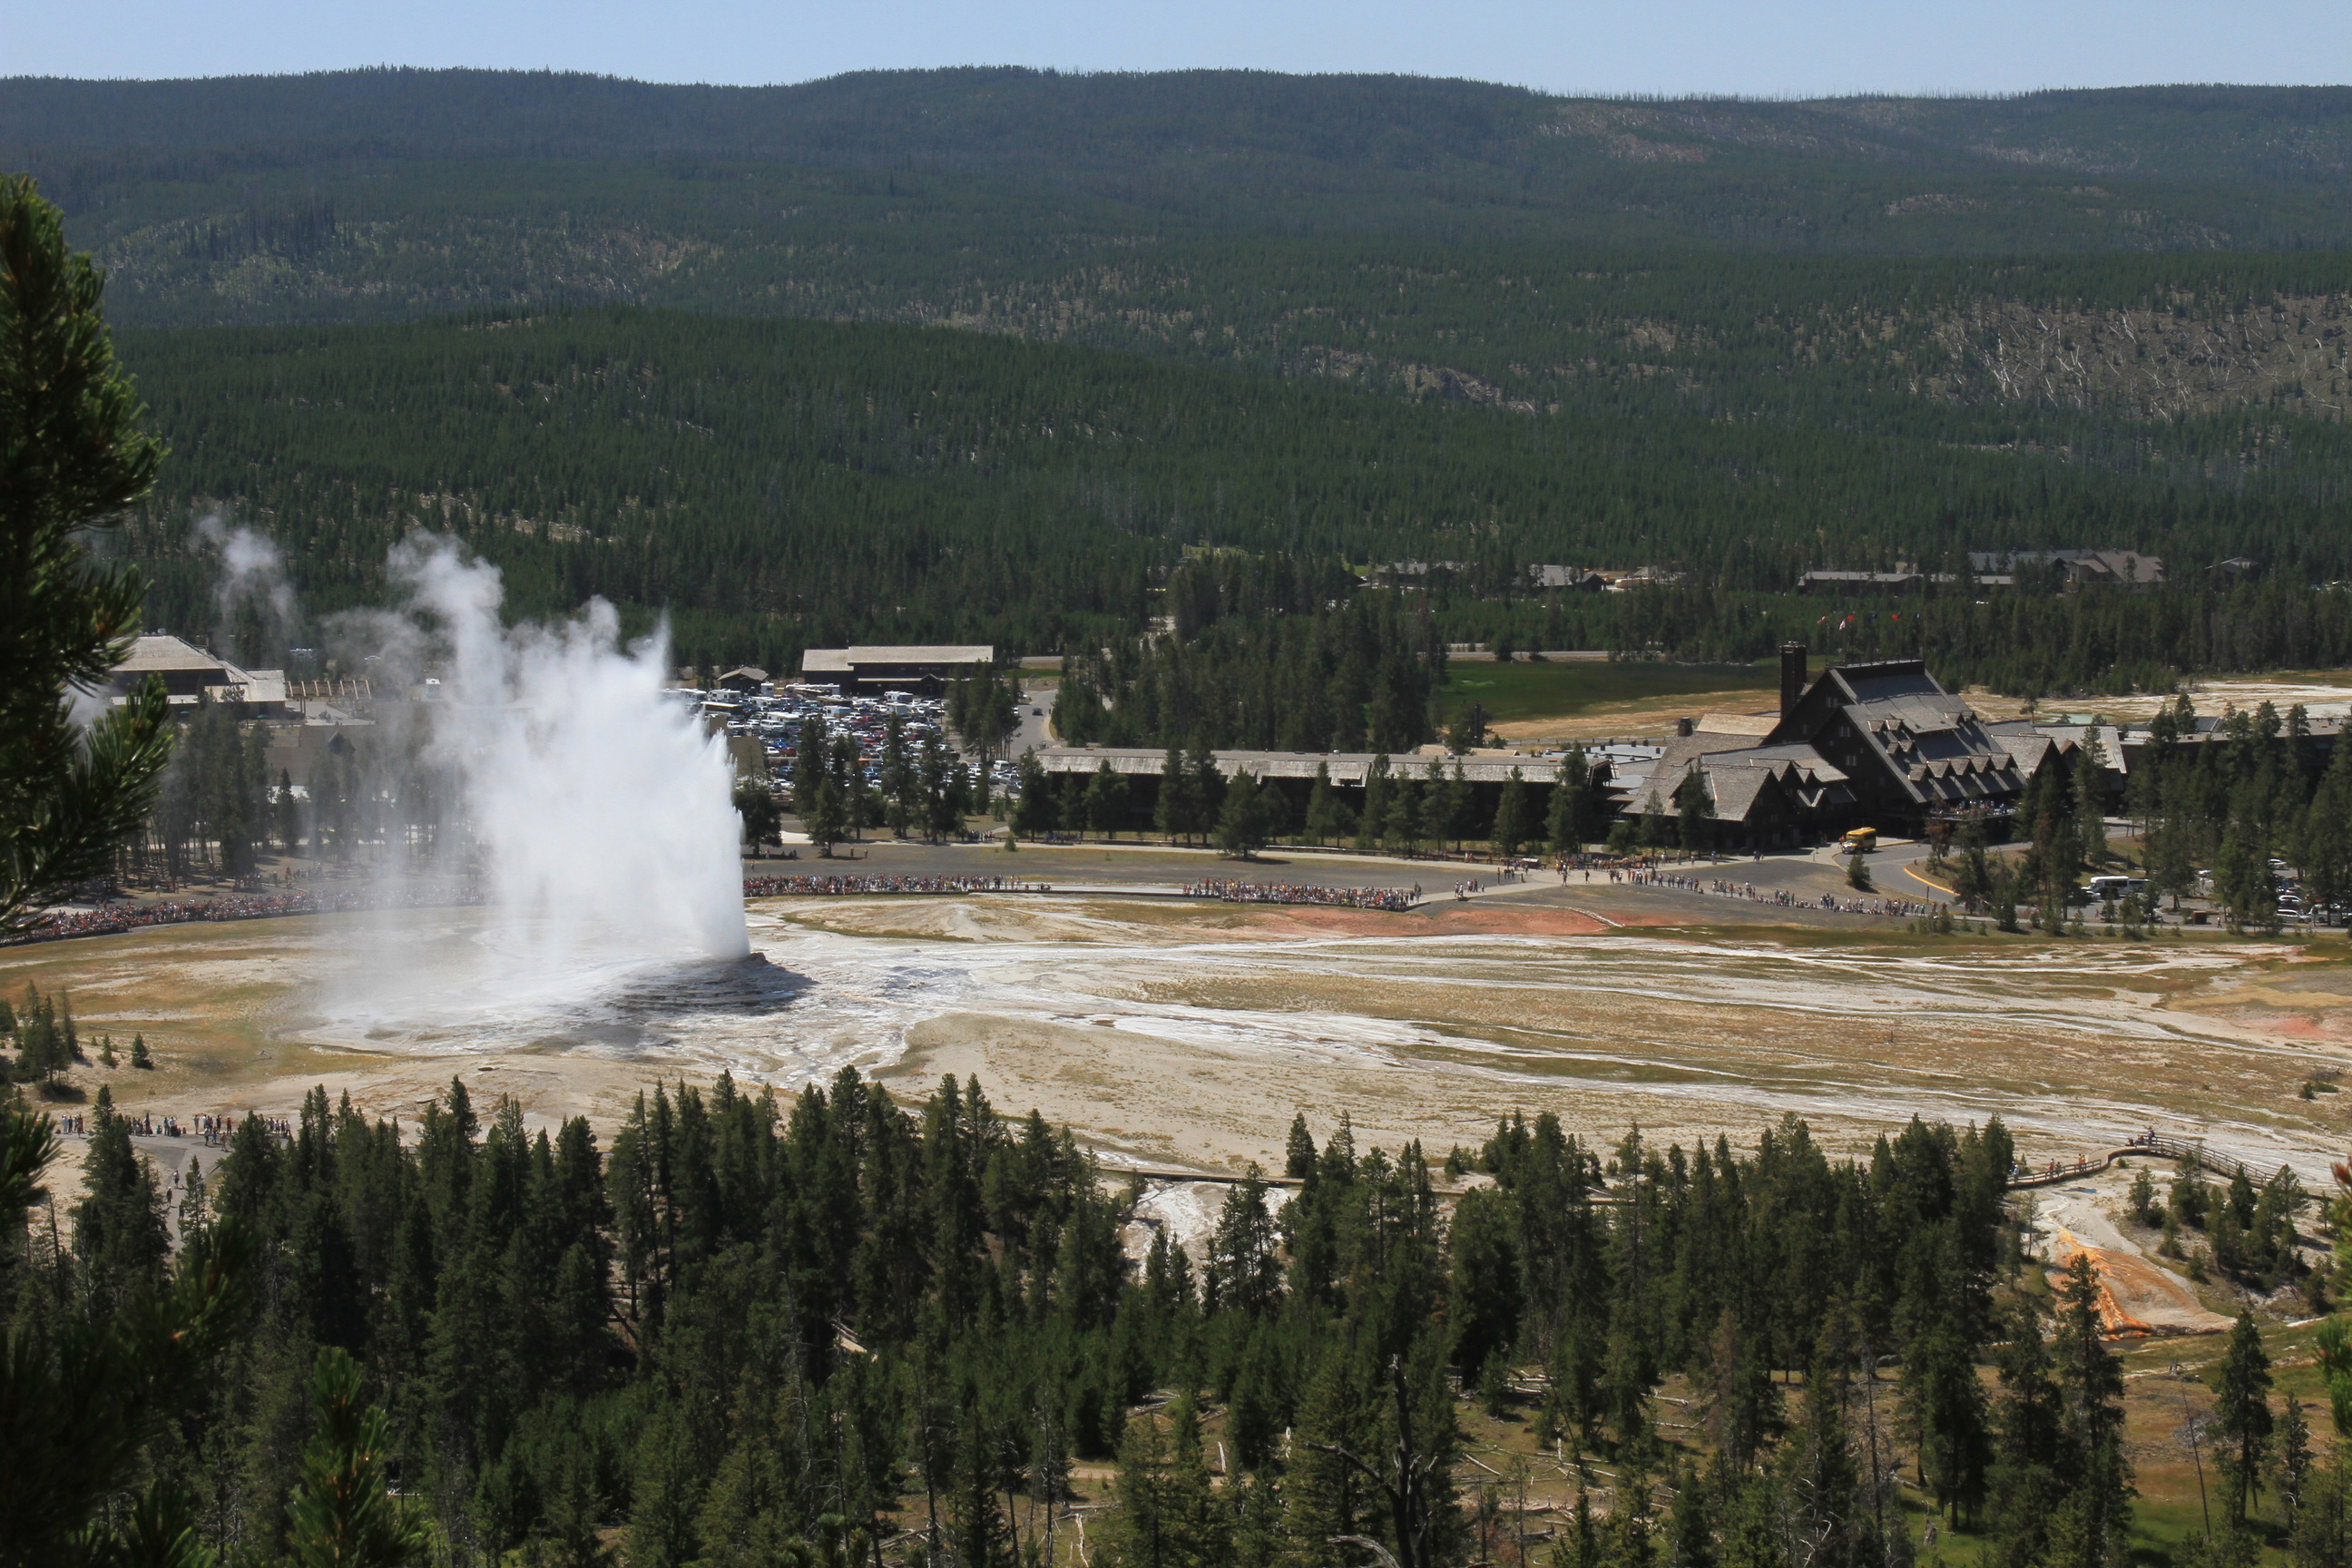 View from Observation Point of visitors watching Old Faithful Geyser with Old Faithful Inn and Old Faithful Visitor Center in background.